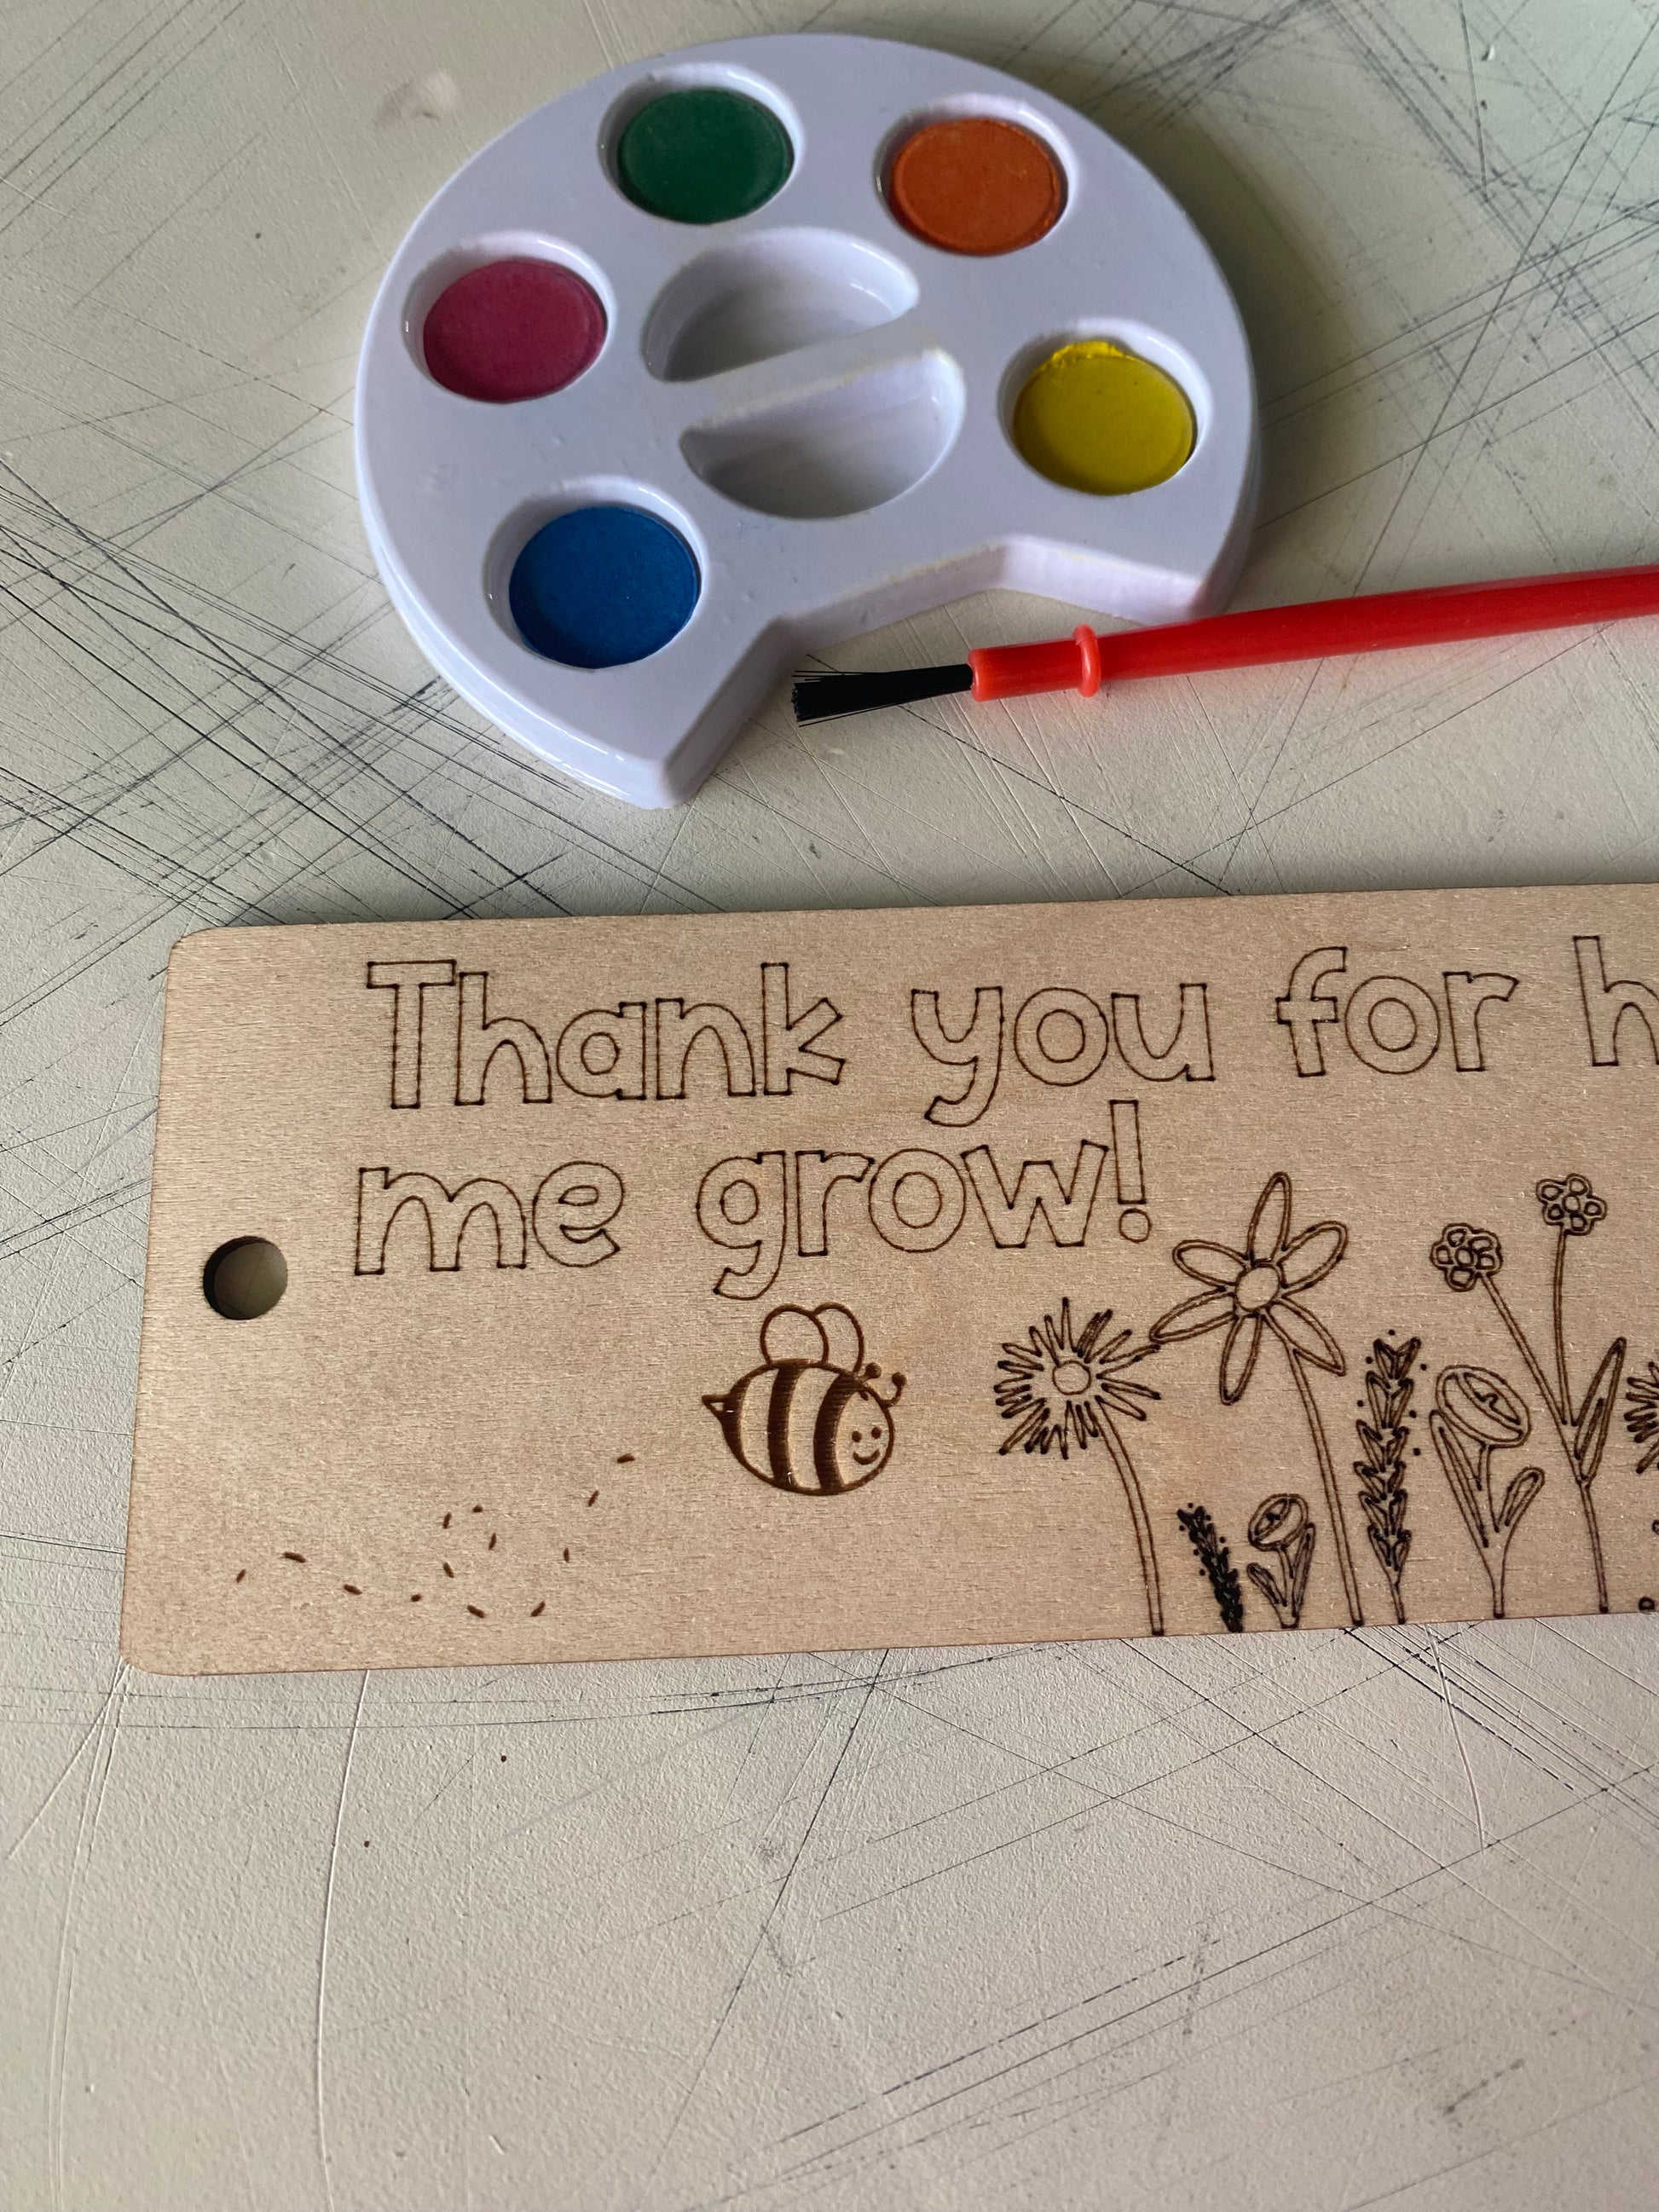 Thank you for helping me grow bookmark craft kit - Novotny Designs